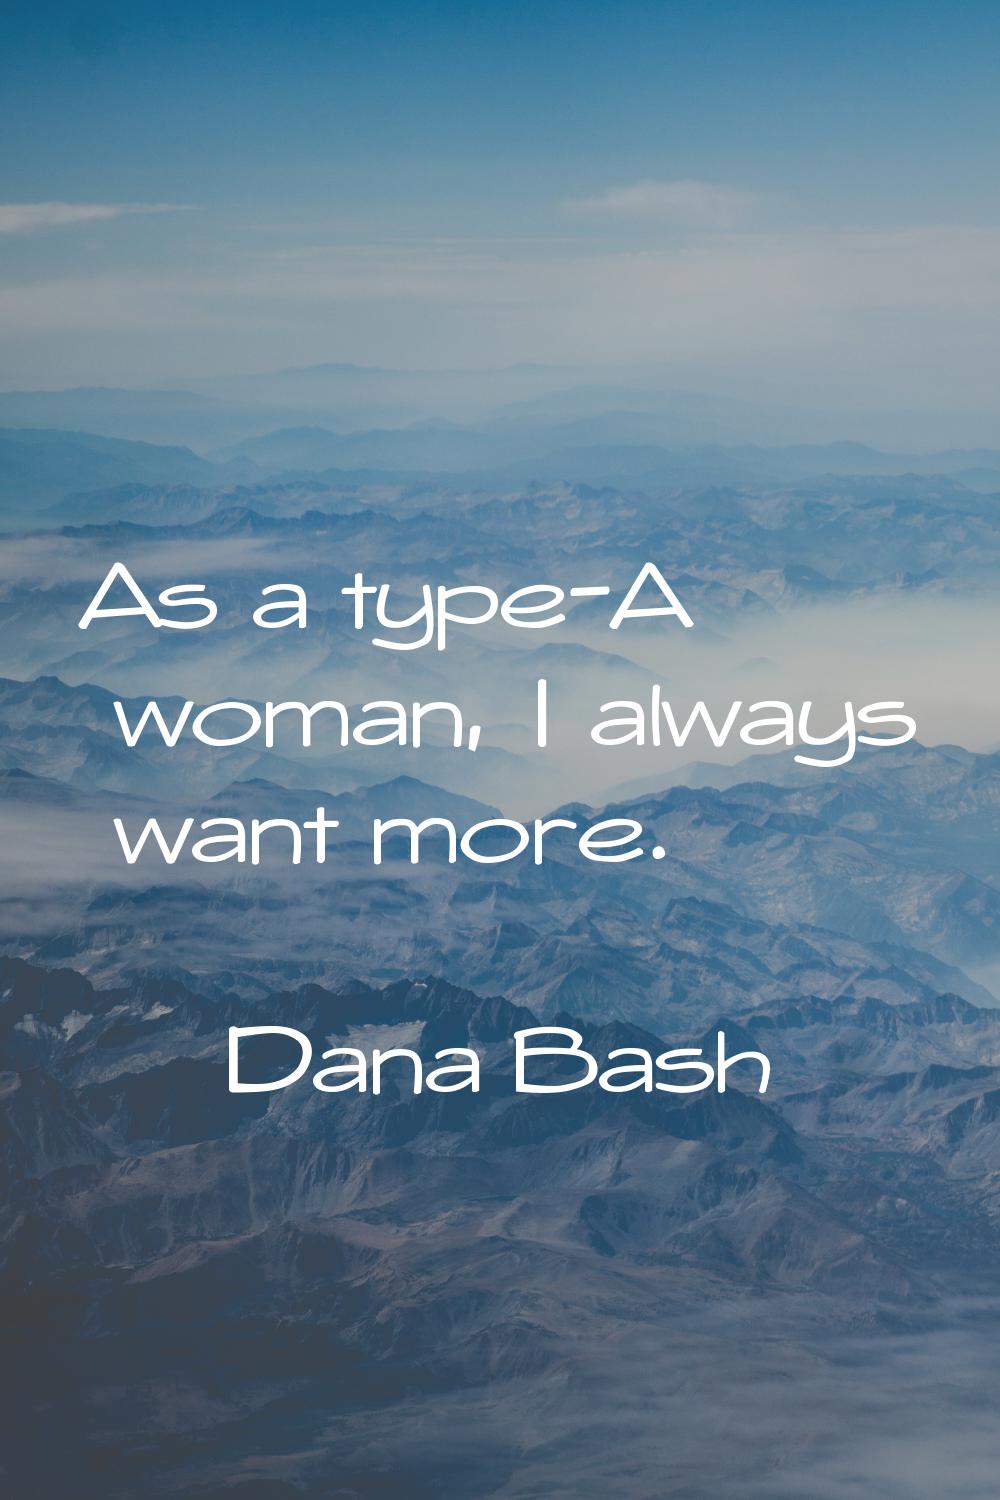 As a type-A woman, I always want more.